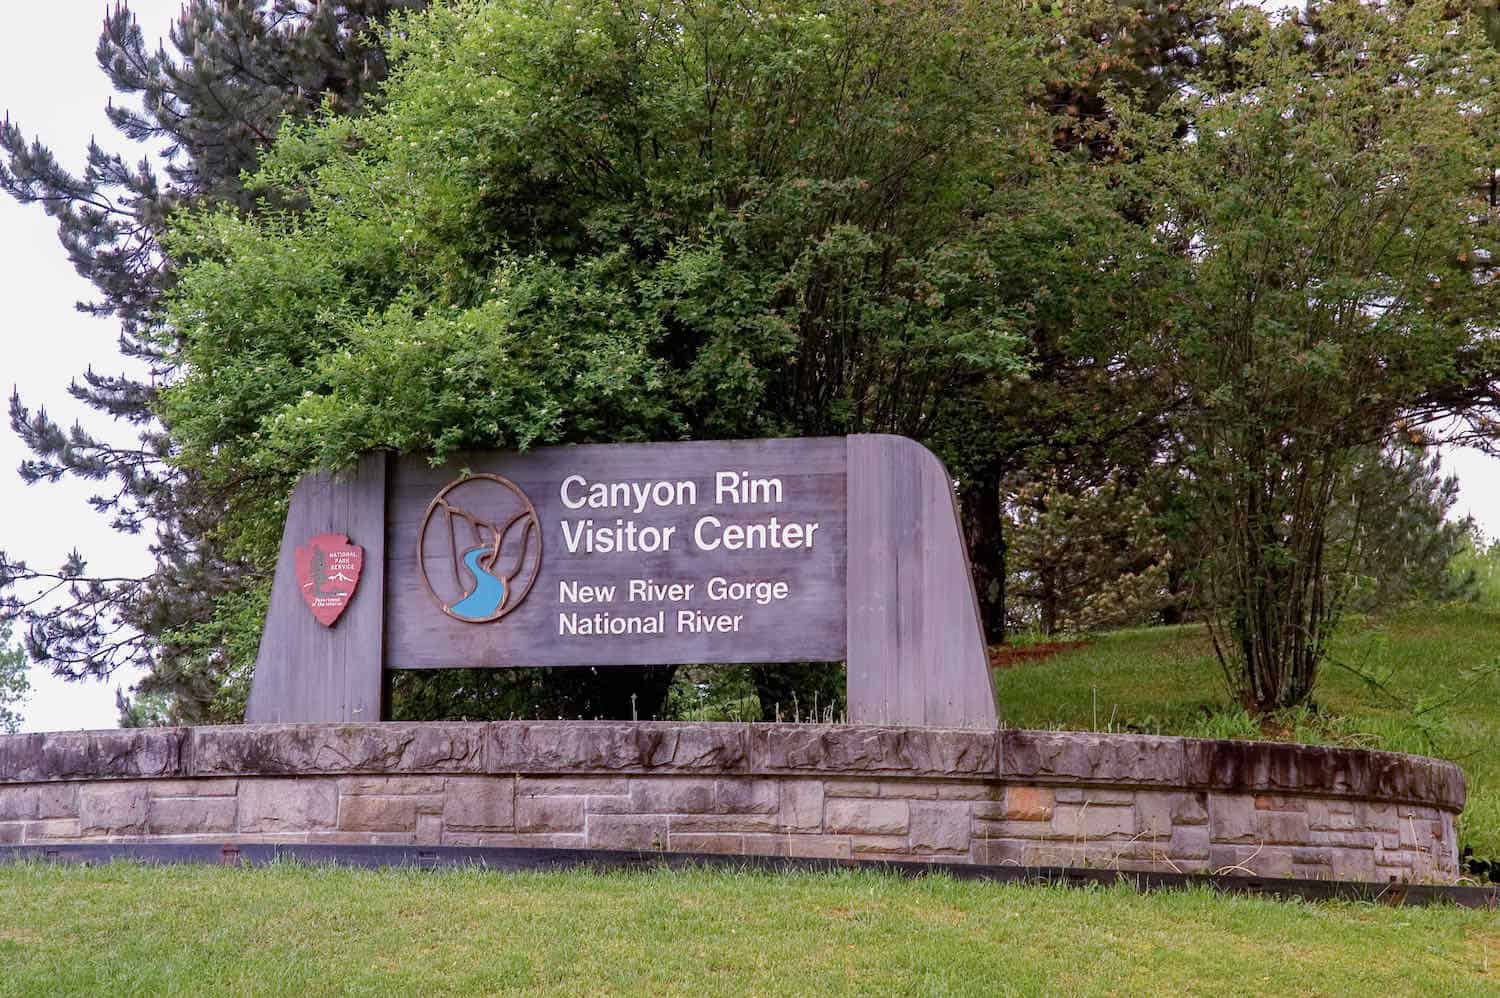 Wooden sign for Canyon Rim Visitor Center with trees in the background